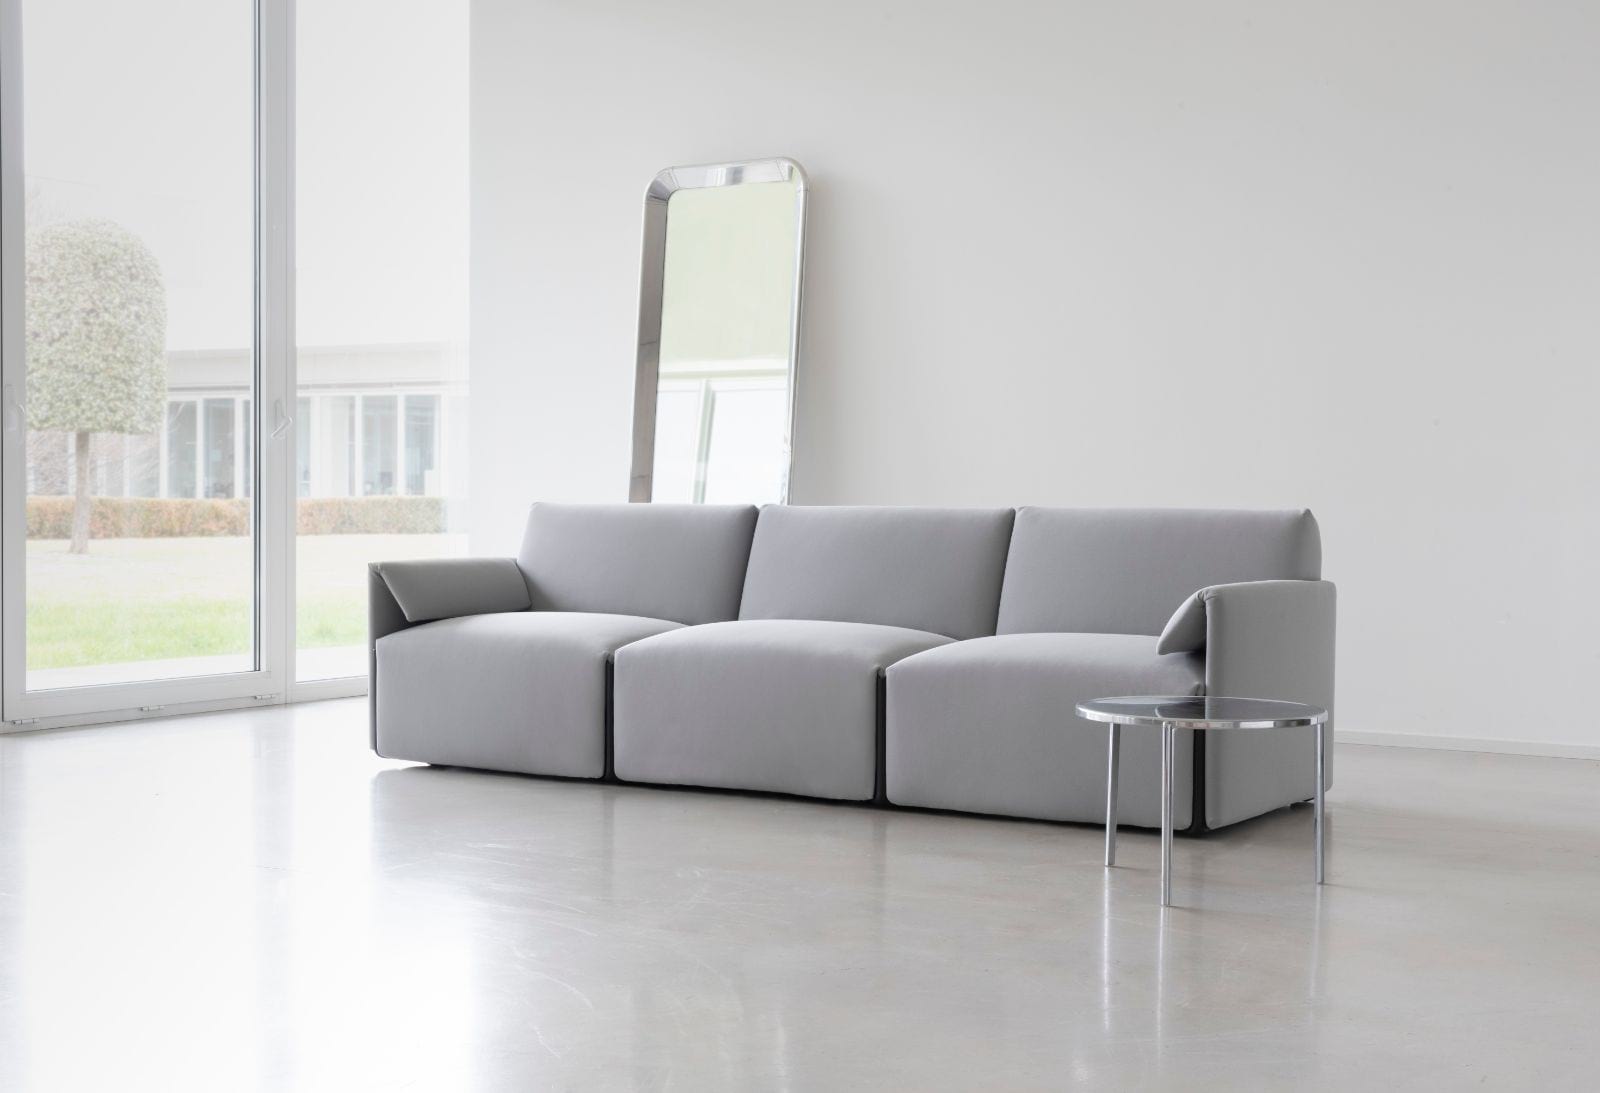 Costume Modular Sofa 2-Seater by Magis | Design Is This